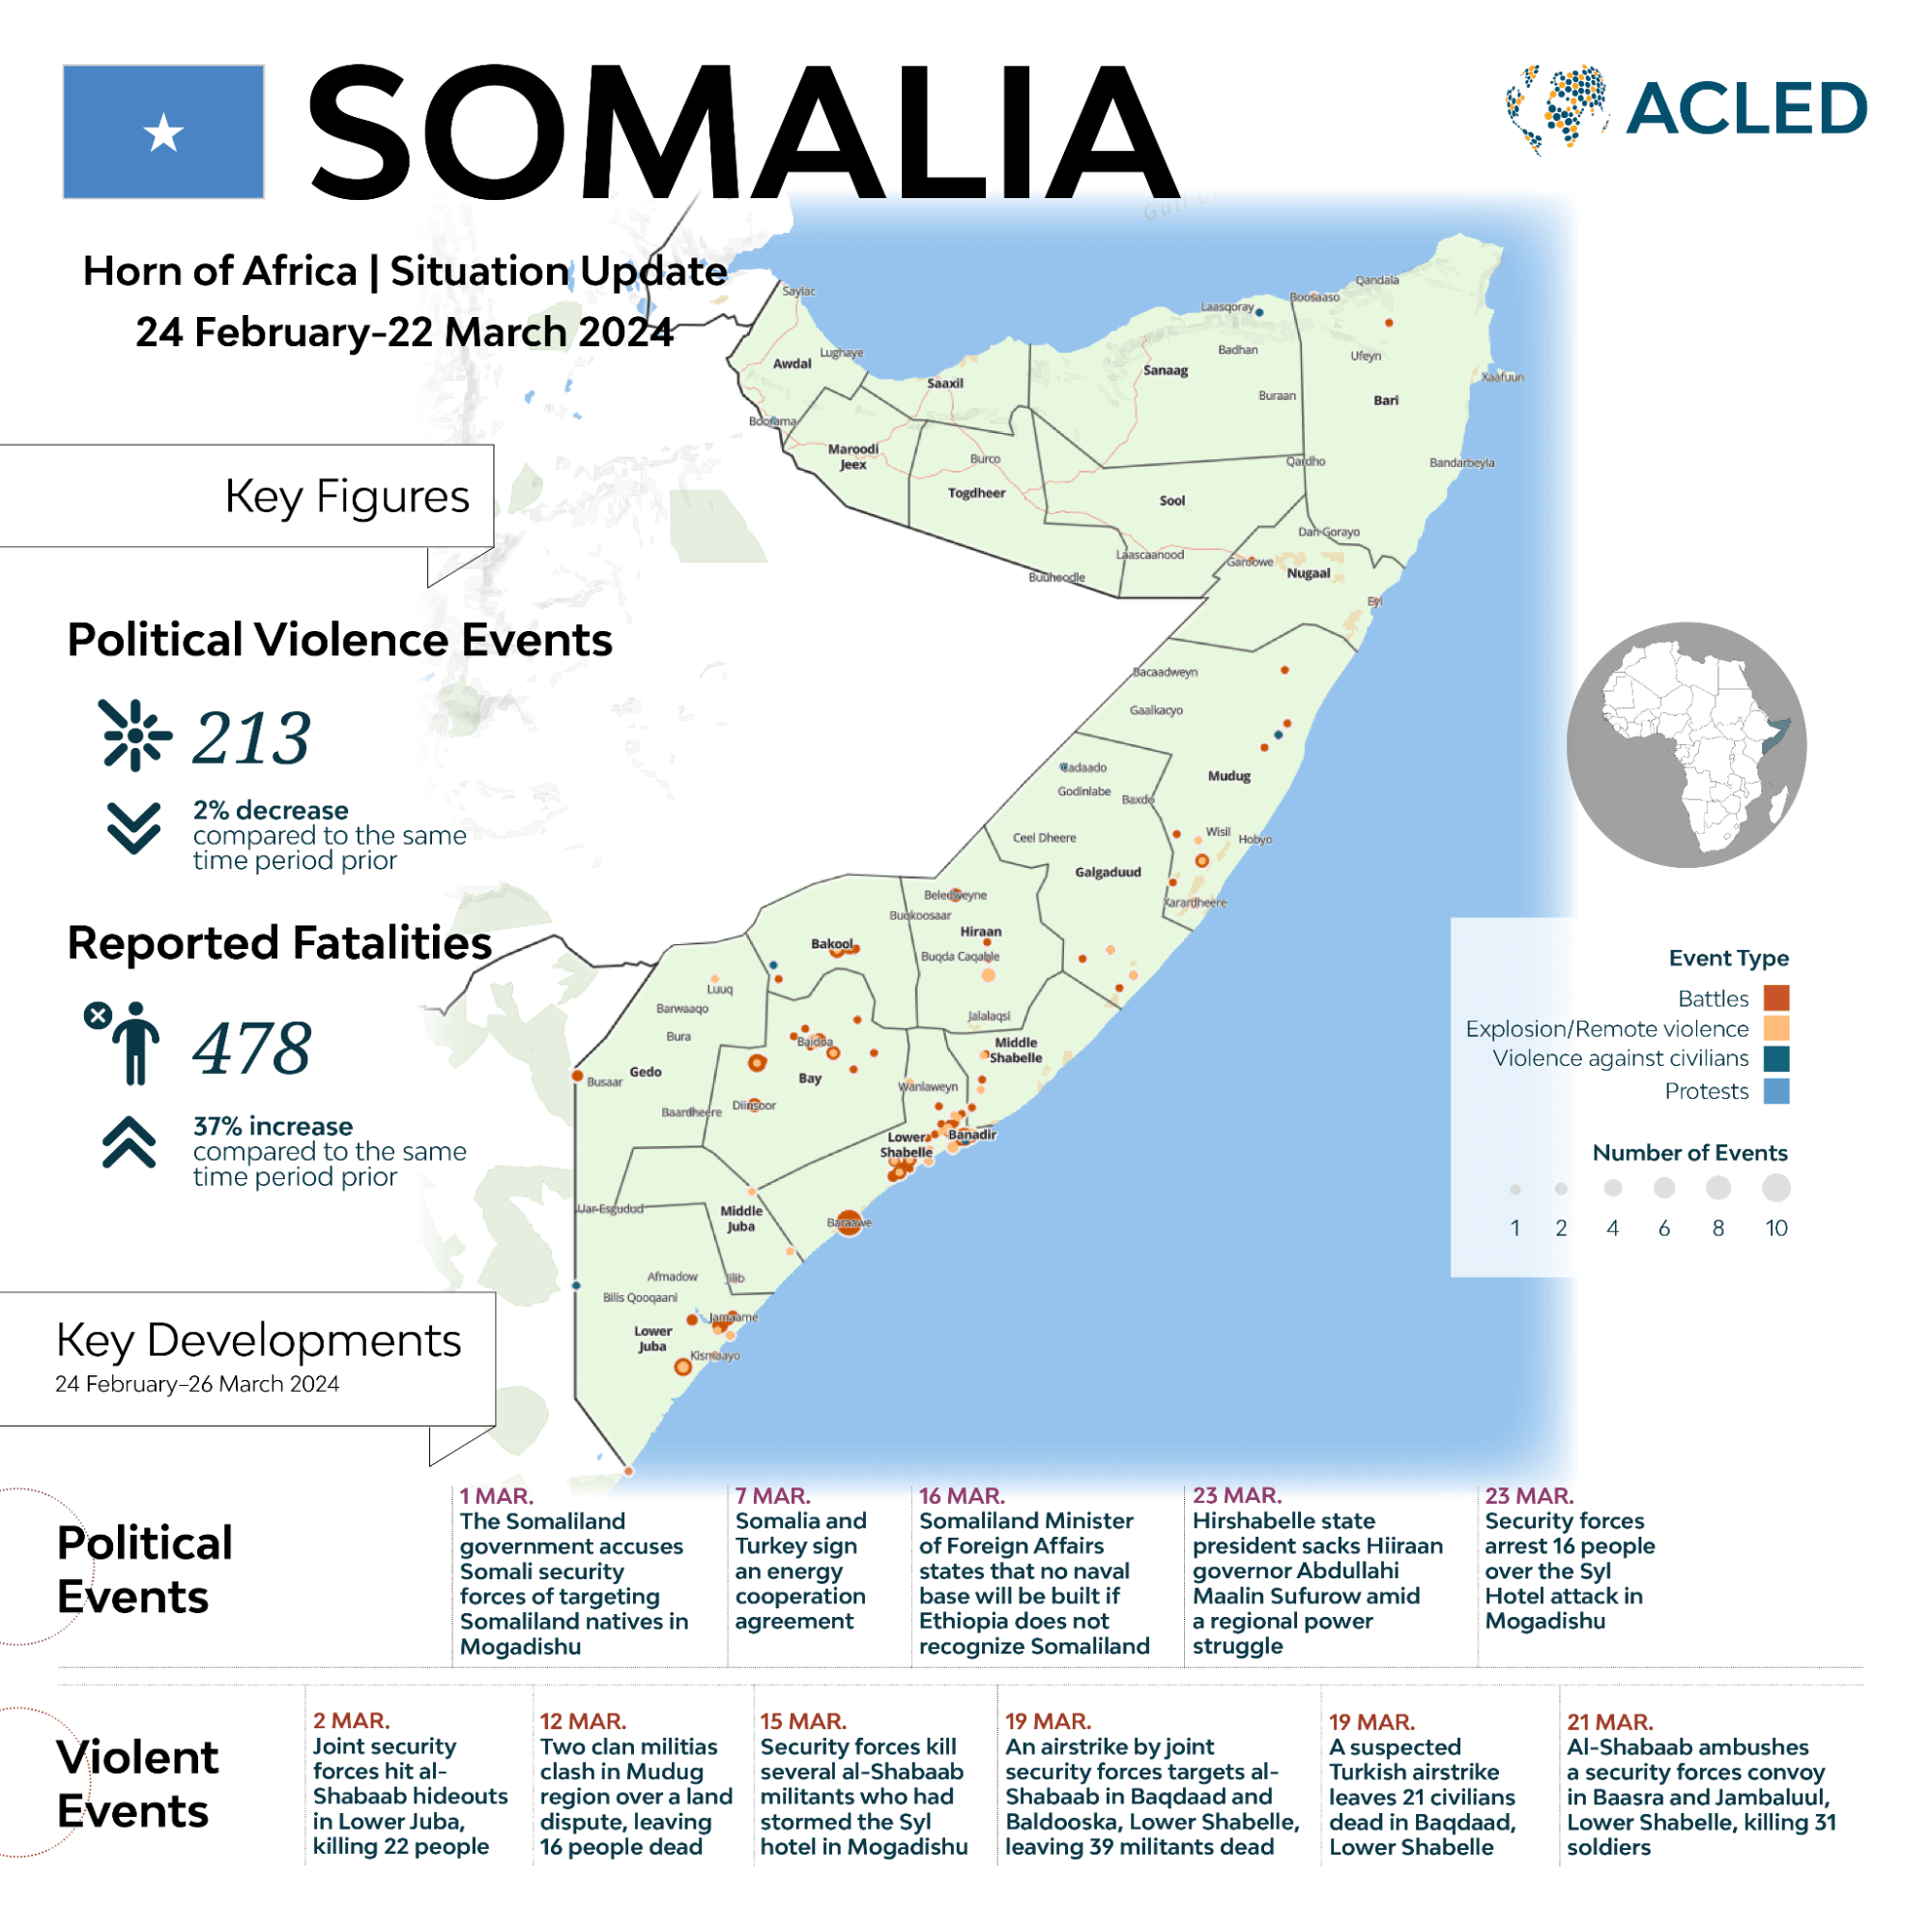 Horn of Africa situation update March 2024 - infographic